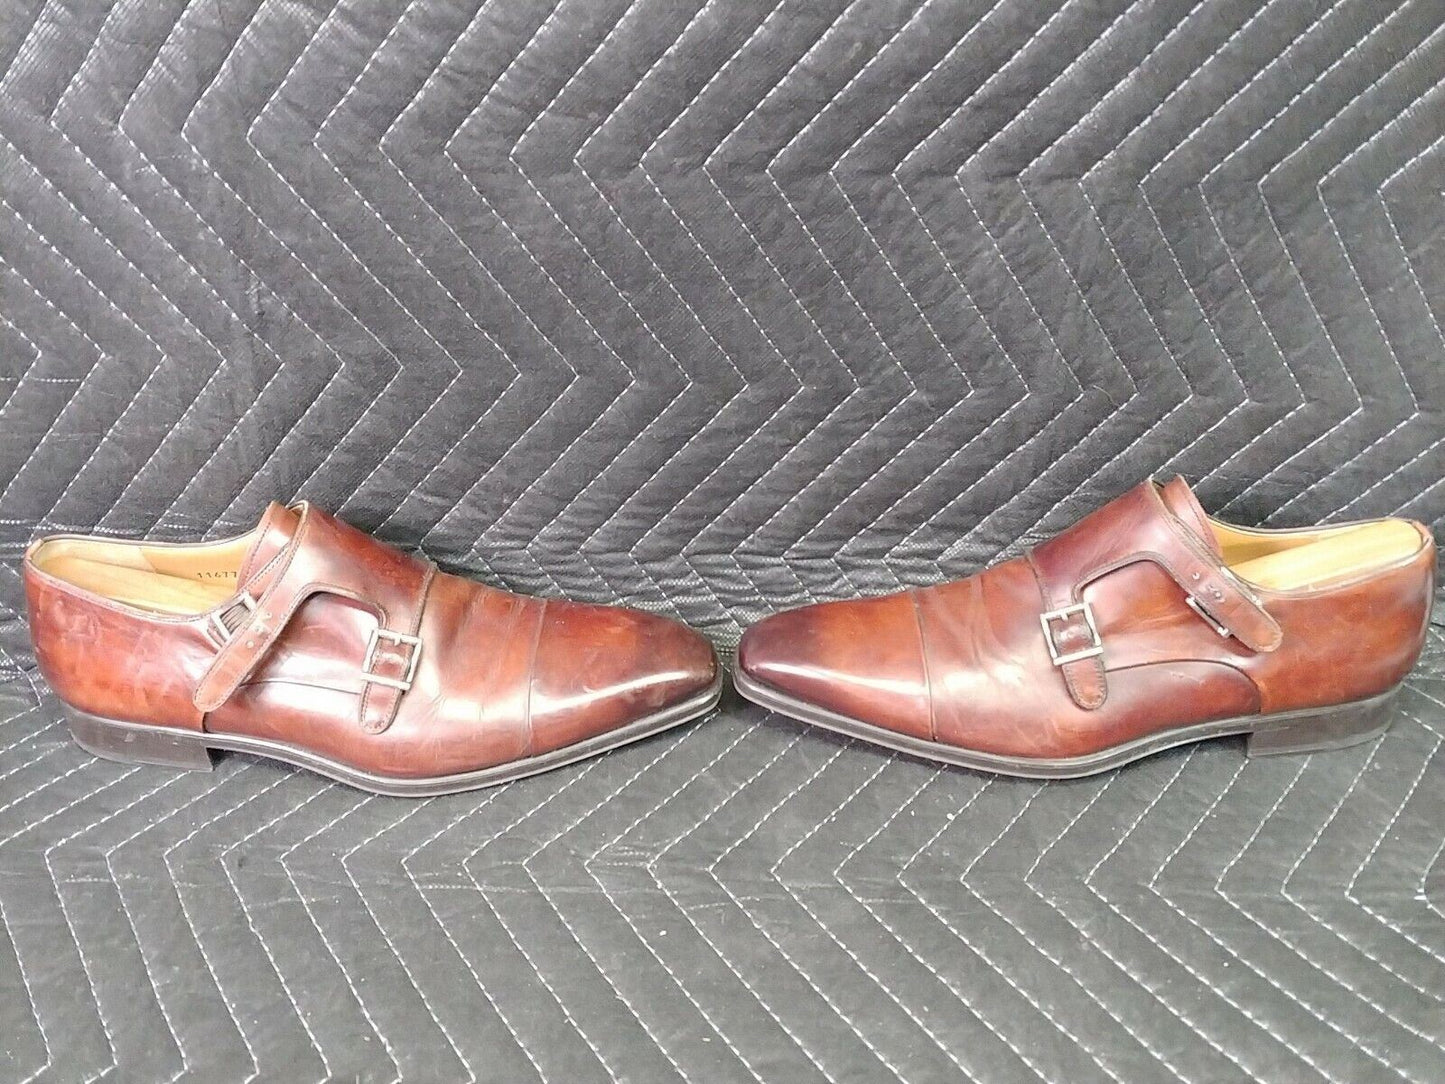 Magnanni Double Monk Strap Loafer Brown Leather Mens 9 M Dress Shoes